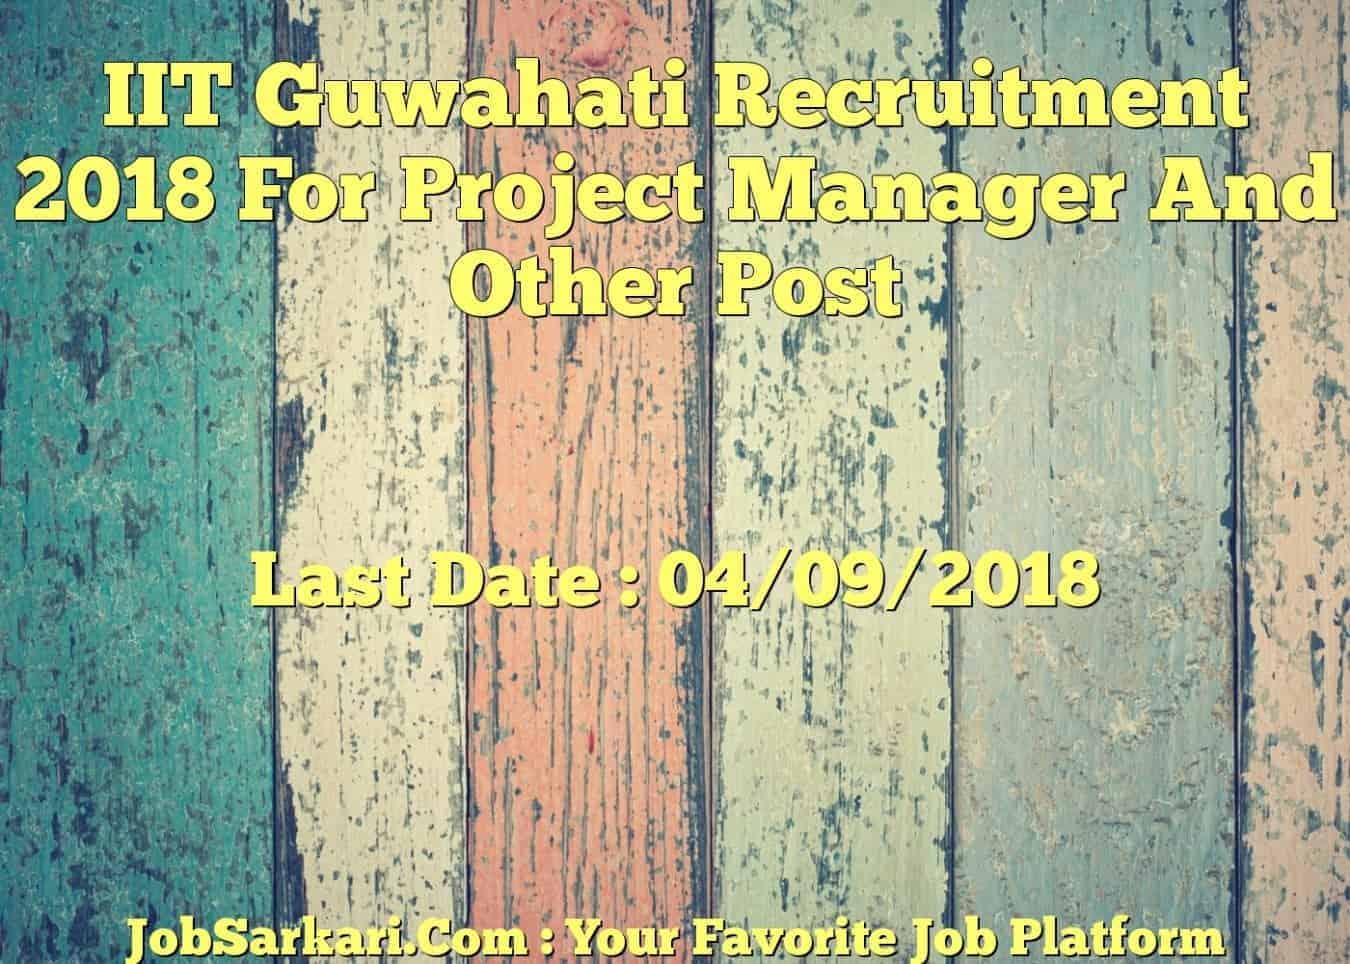 IIT Guwahati Recruitment 2018 For Project Manager And Other Post